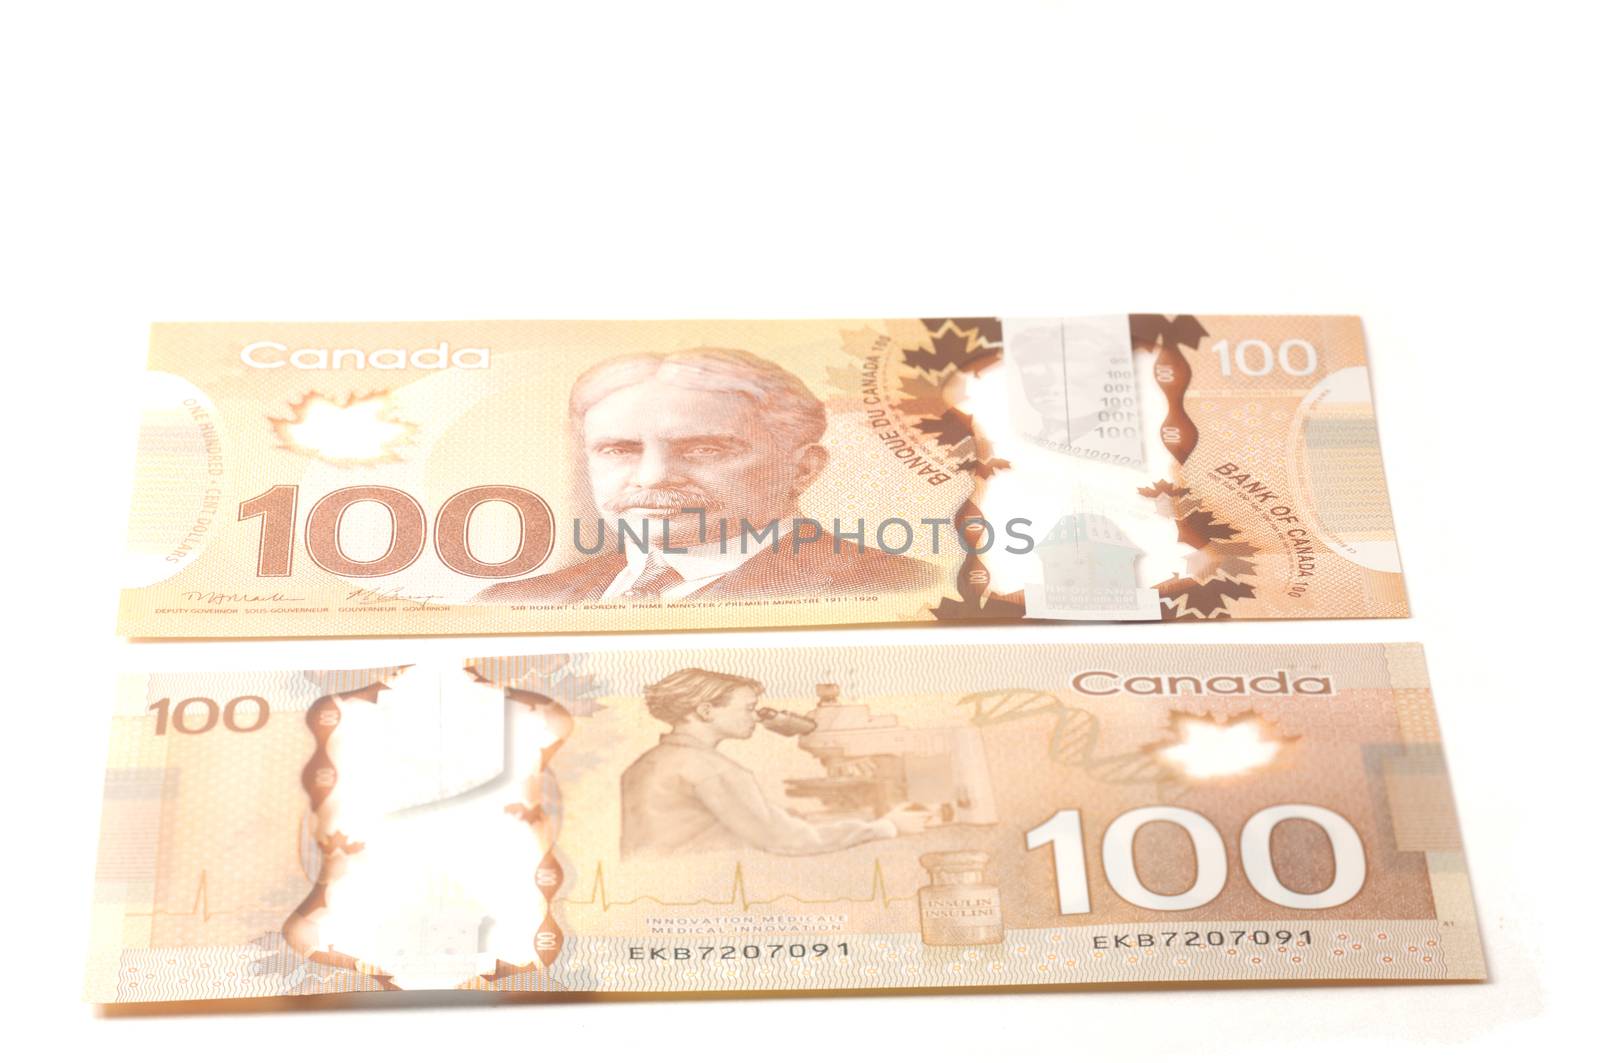 100 dollars Canadian bank notes by daoleduc